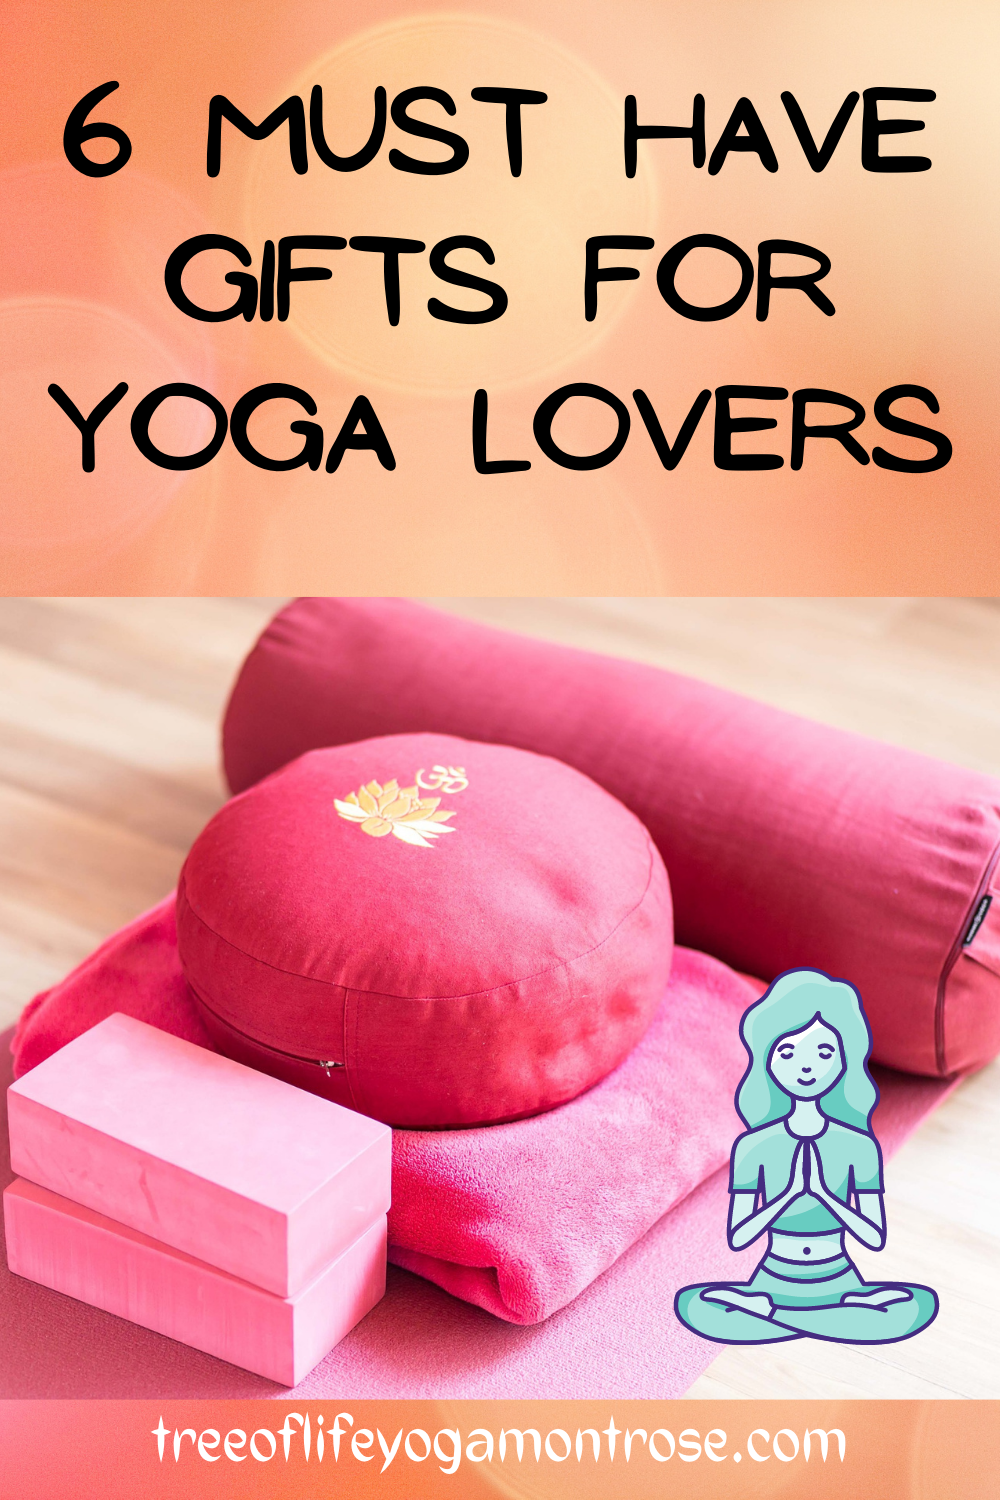 6 Must Have Gifts for Yoga Lovers